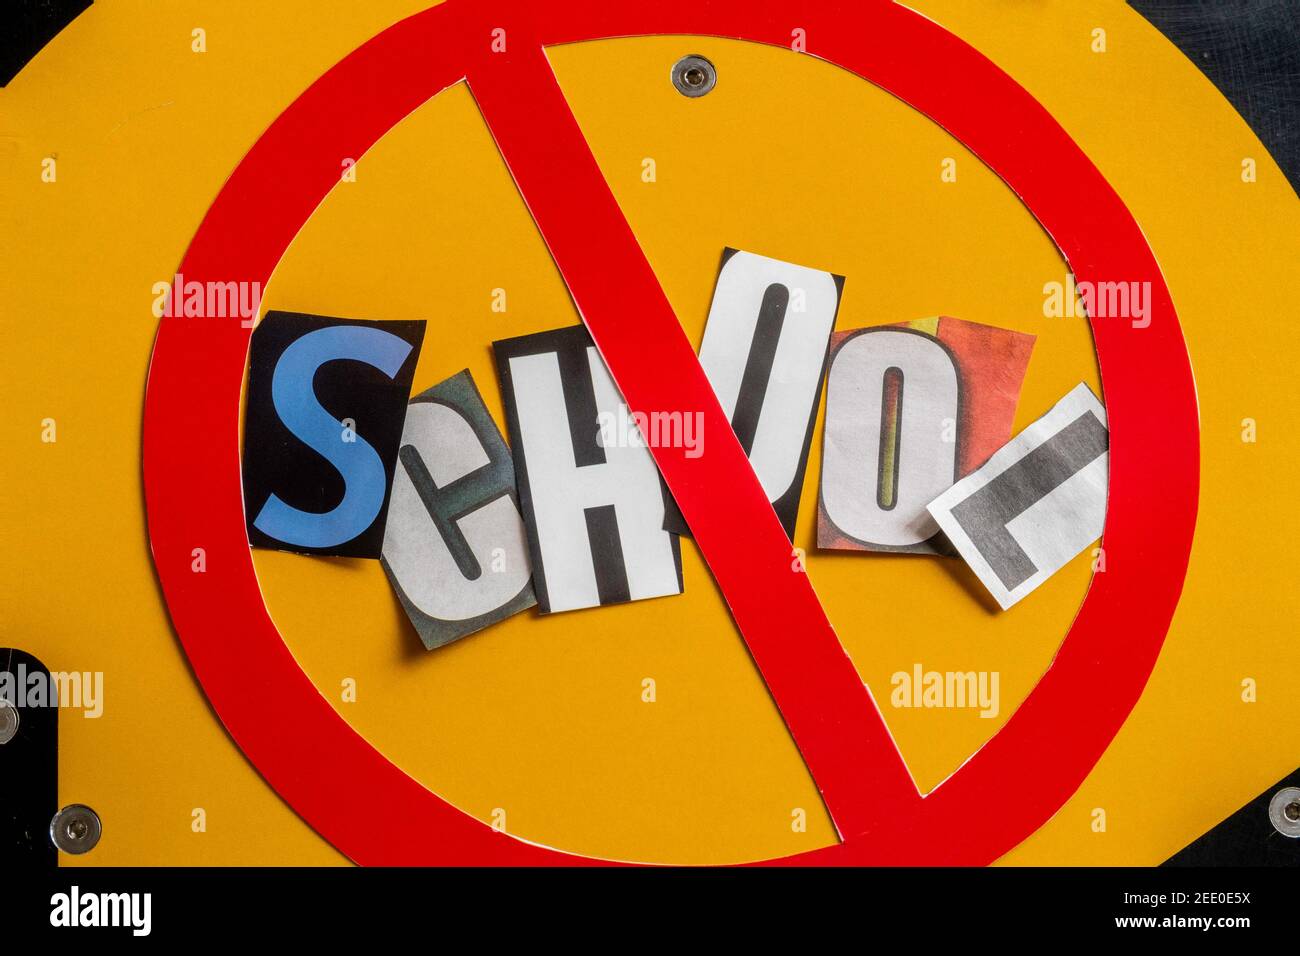 The Concept of 'Cancel School ' using cut-out paper letters in the ransom note effect typography inside The International NO Symbol, USA Stock Photo